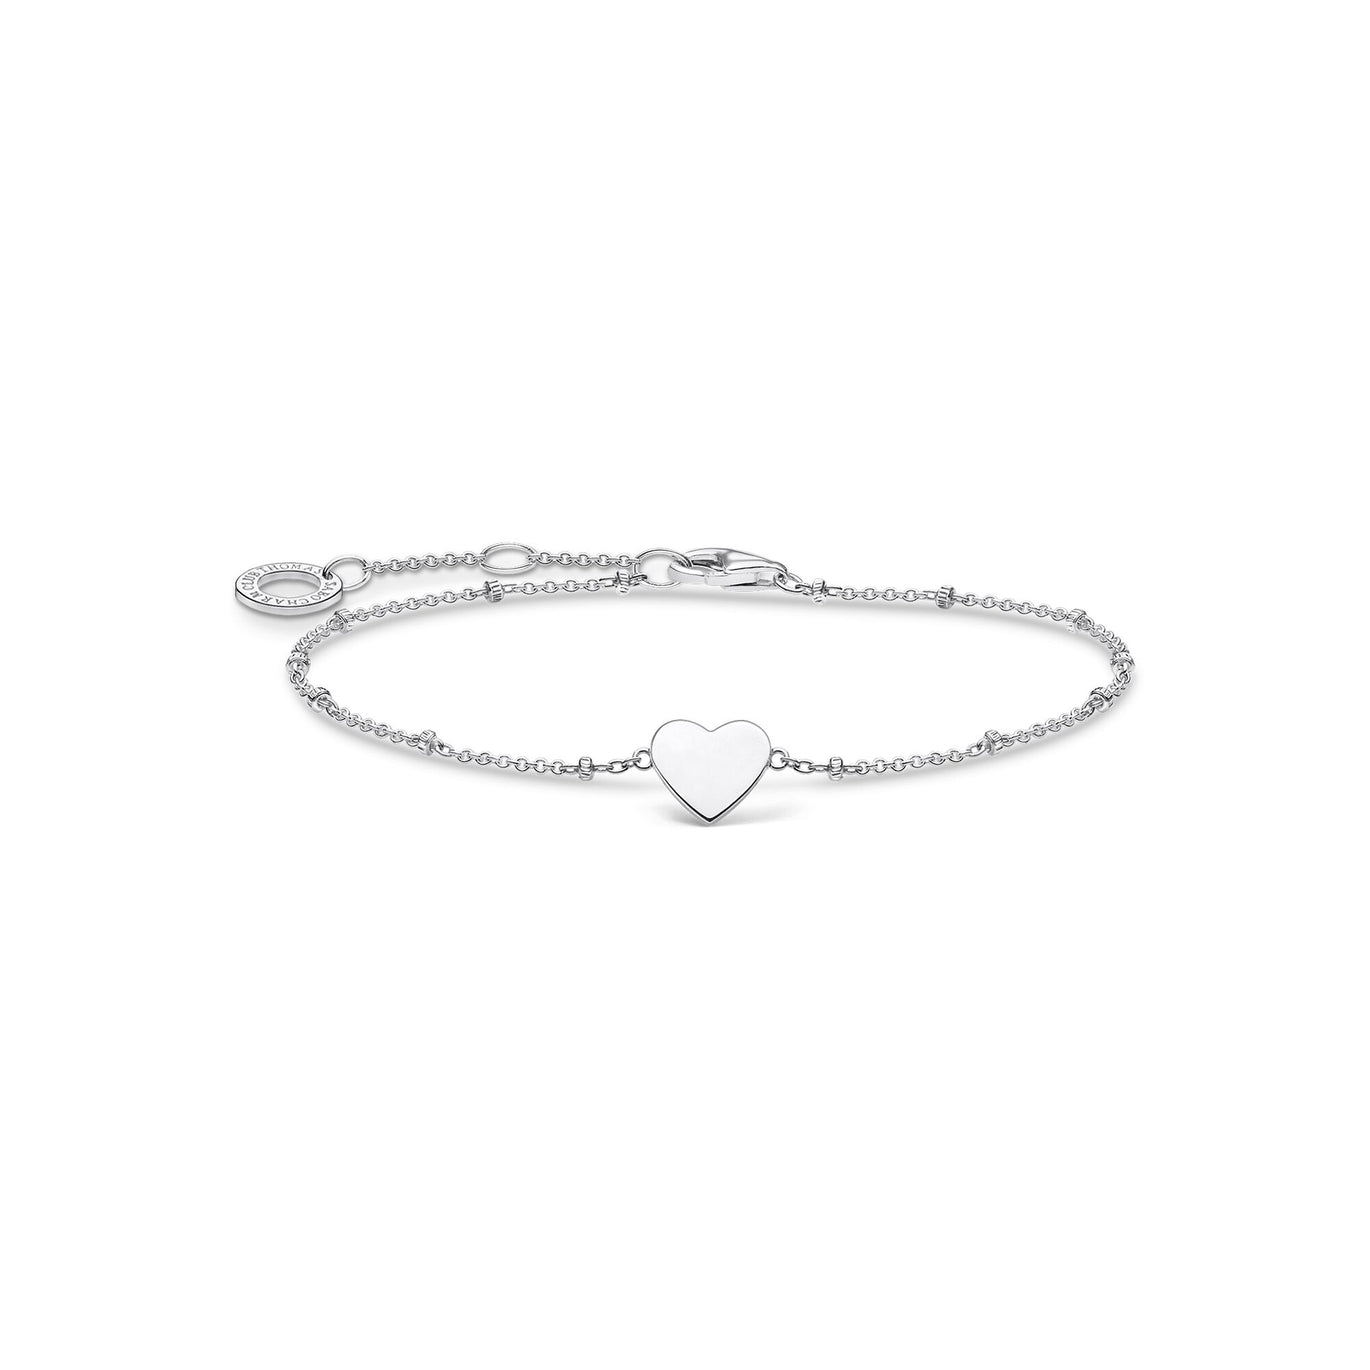 Thomas Sabo Bracelet Heart with Dots Silver